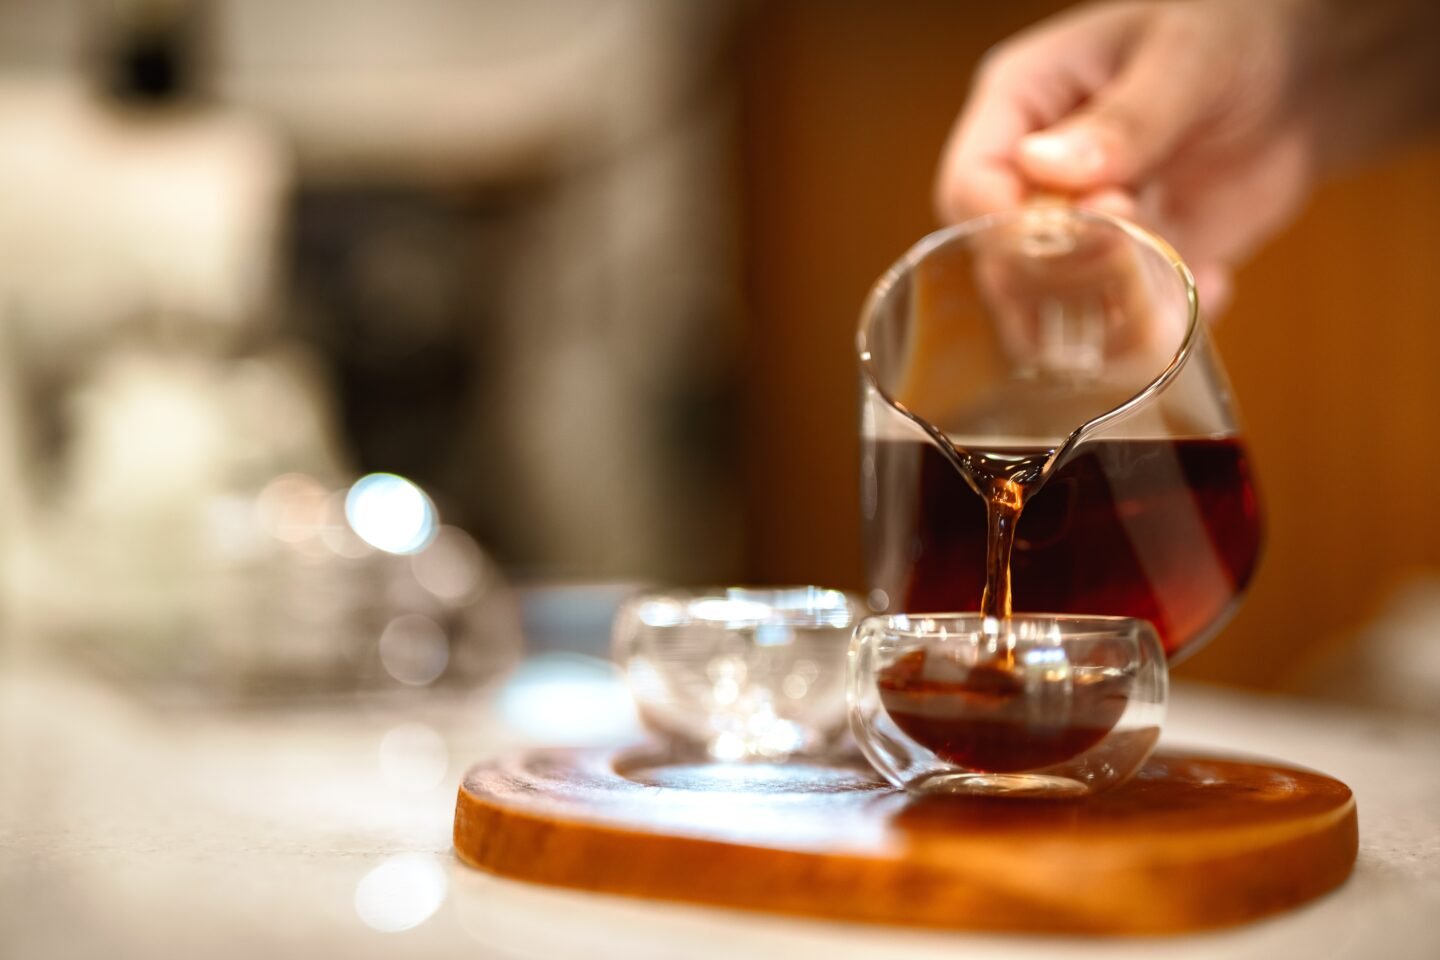 geisha-coffee-being-poured-into-a-cup